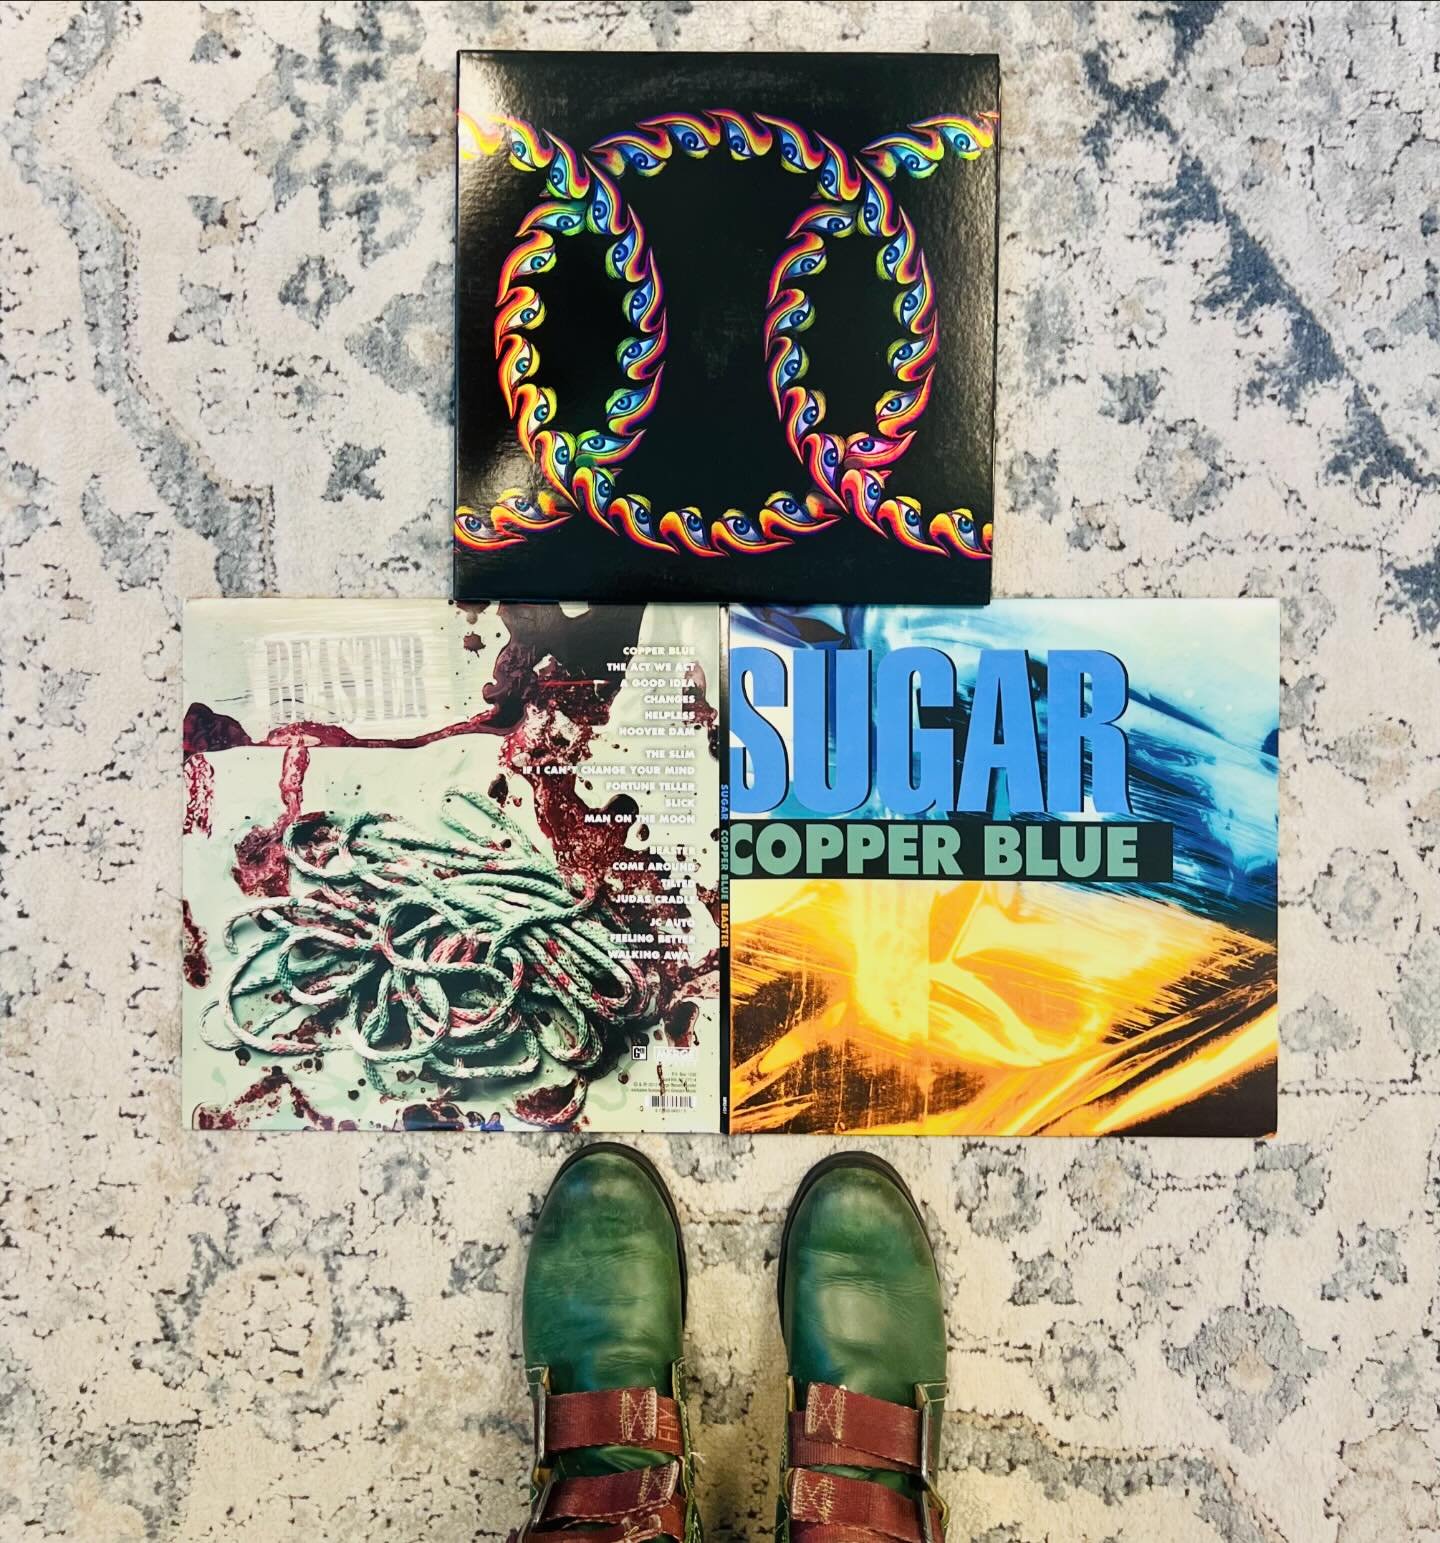 Today I'm putting away the jazz and spinning one of my all-time favorites, Sugar. And when couldn't we all use a reminder of why the fuck we're here with TOOL's Lateralus? I know I sometimes forget.

#acupunctureclinicspins #rocknrollfriday #sugarcop